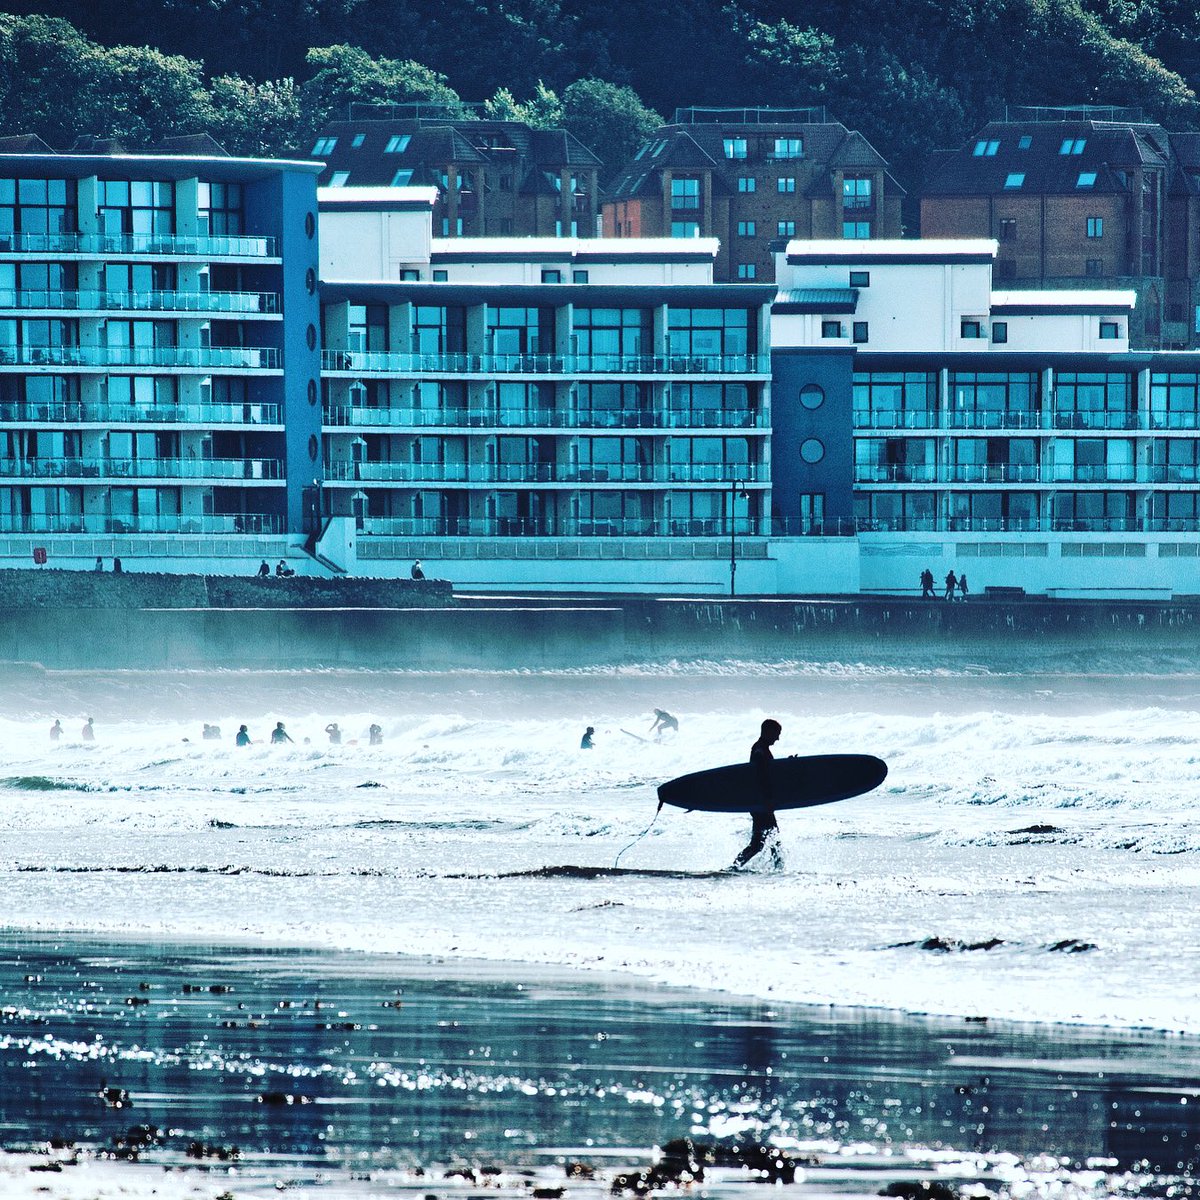 Very busy on the ‘Ho! yesterday afternoon making the most of this lovely weather and looking forward to @Fistralbeach on Wednesday with @opsurfwell … @SurfingDevon @westwardhodevon #surfwell #surfingdevon #MentalHealthMatters